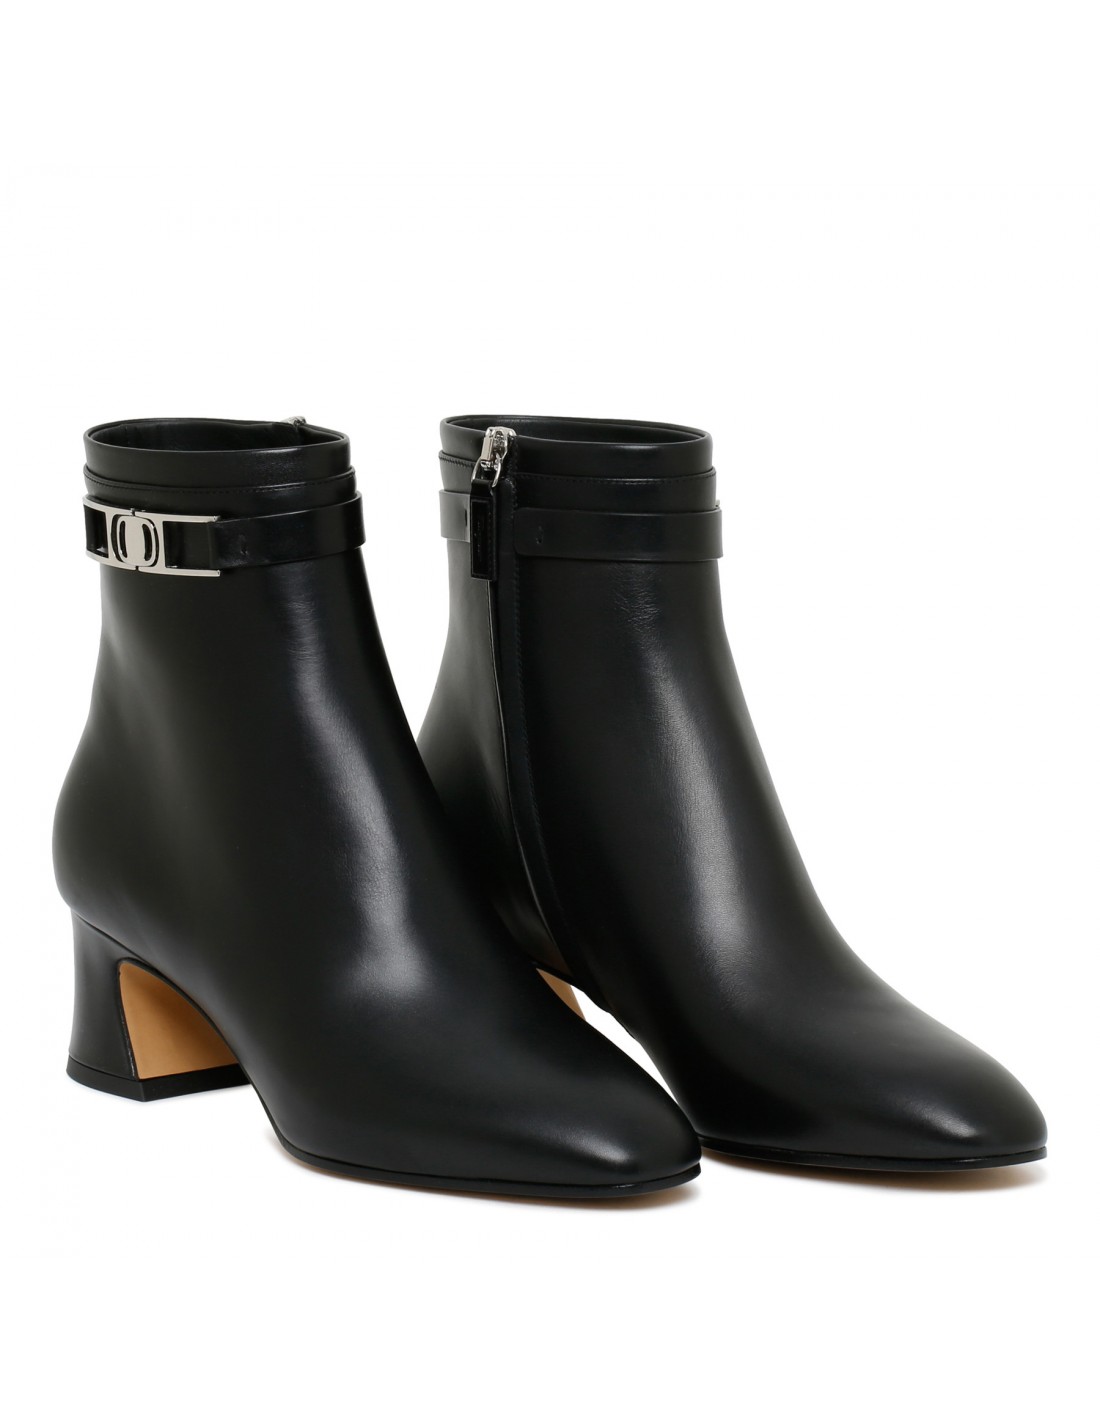 Vara chain black ankle boots